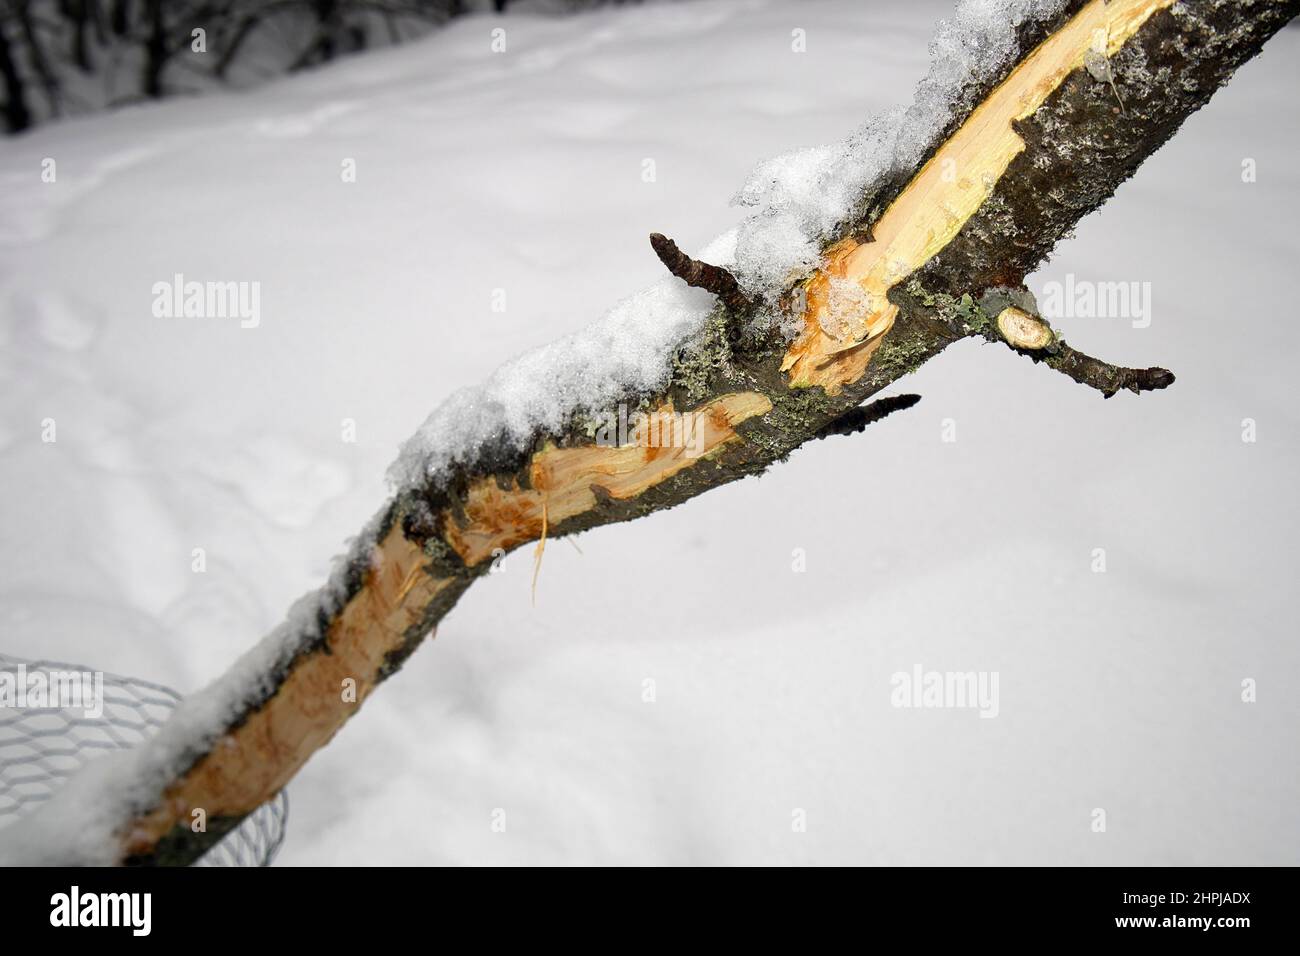 A young apple tree in winter with bark nibbled by rabbit Stock Photo